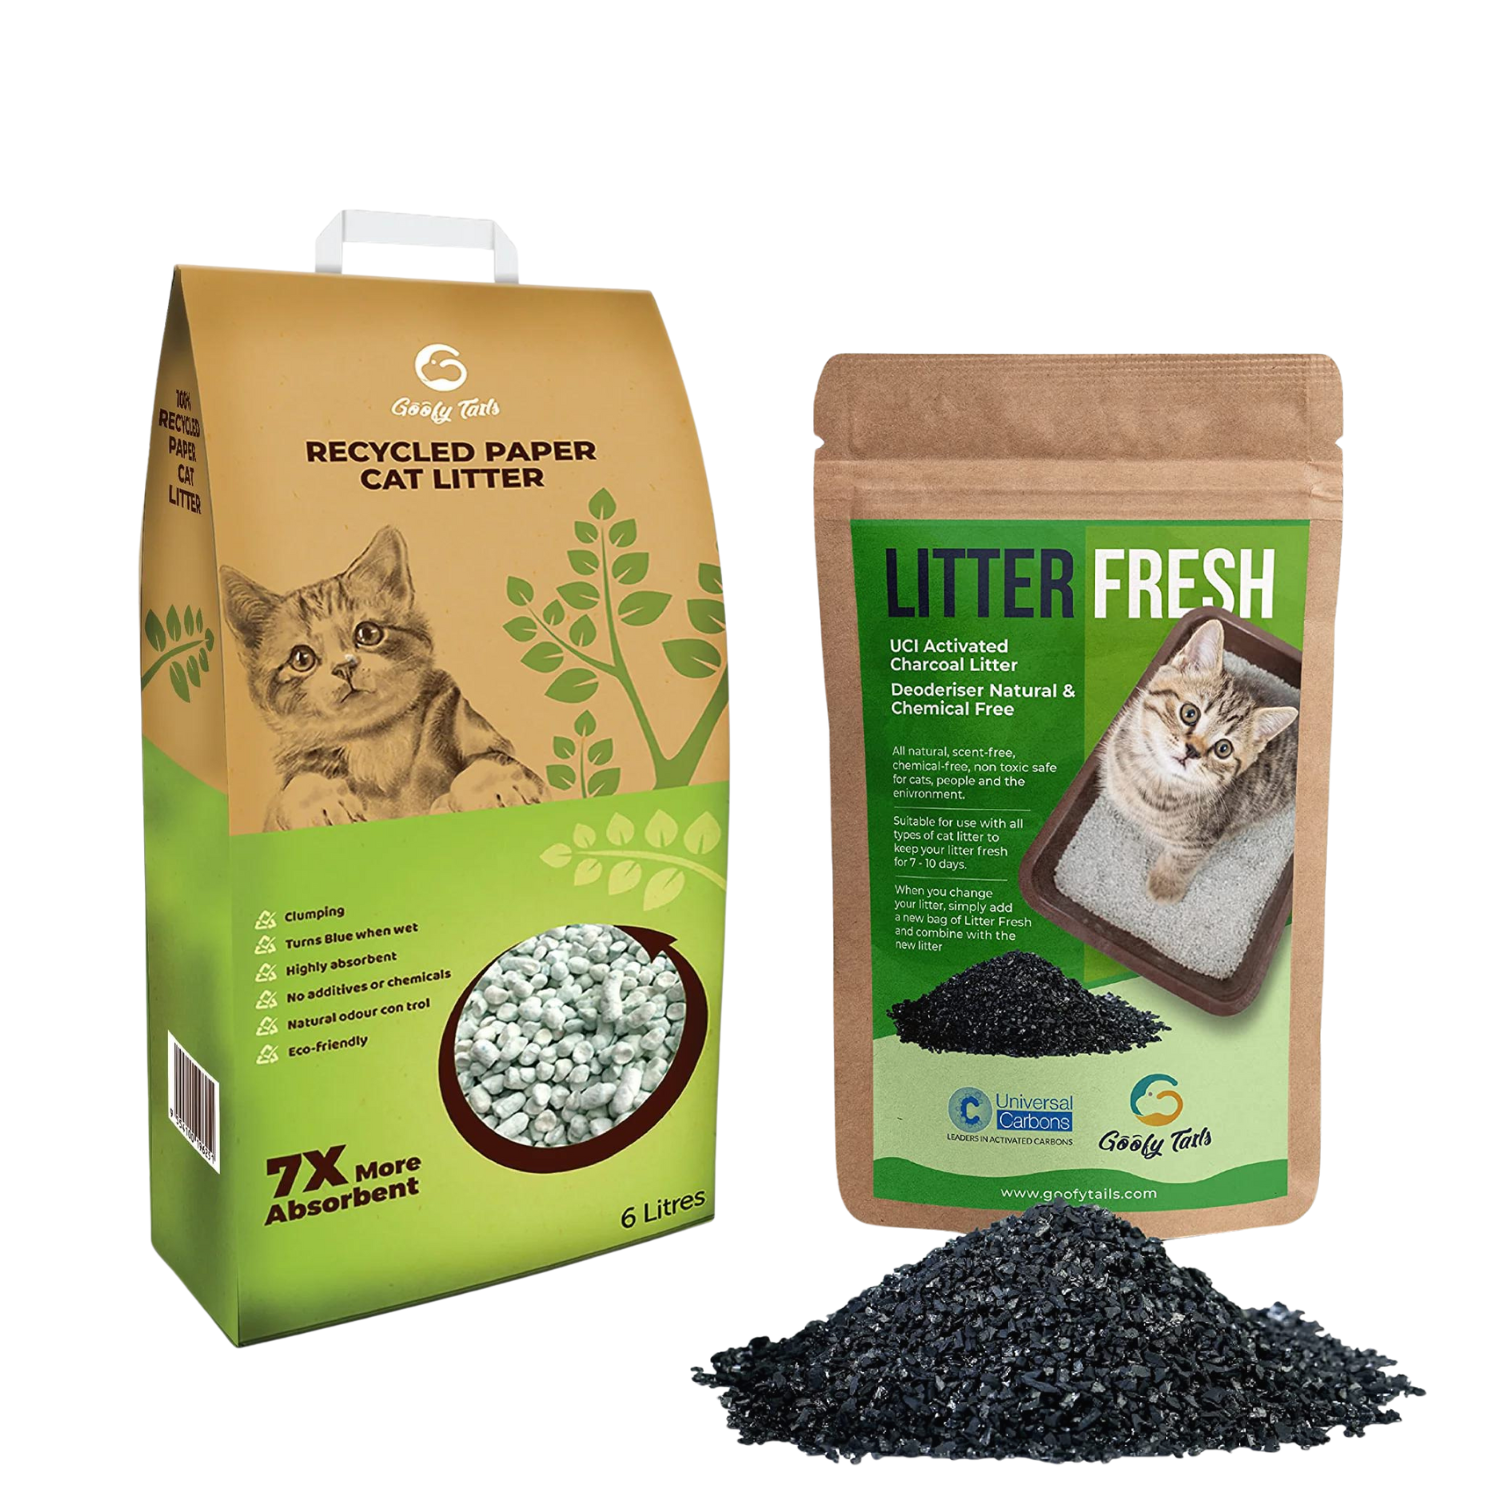 Recycled Paper Cat Litter With Activated Litter Freshener Combo